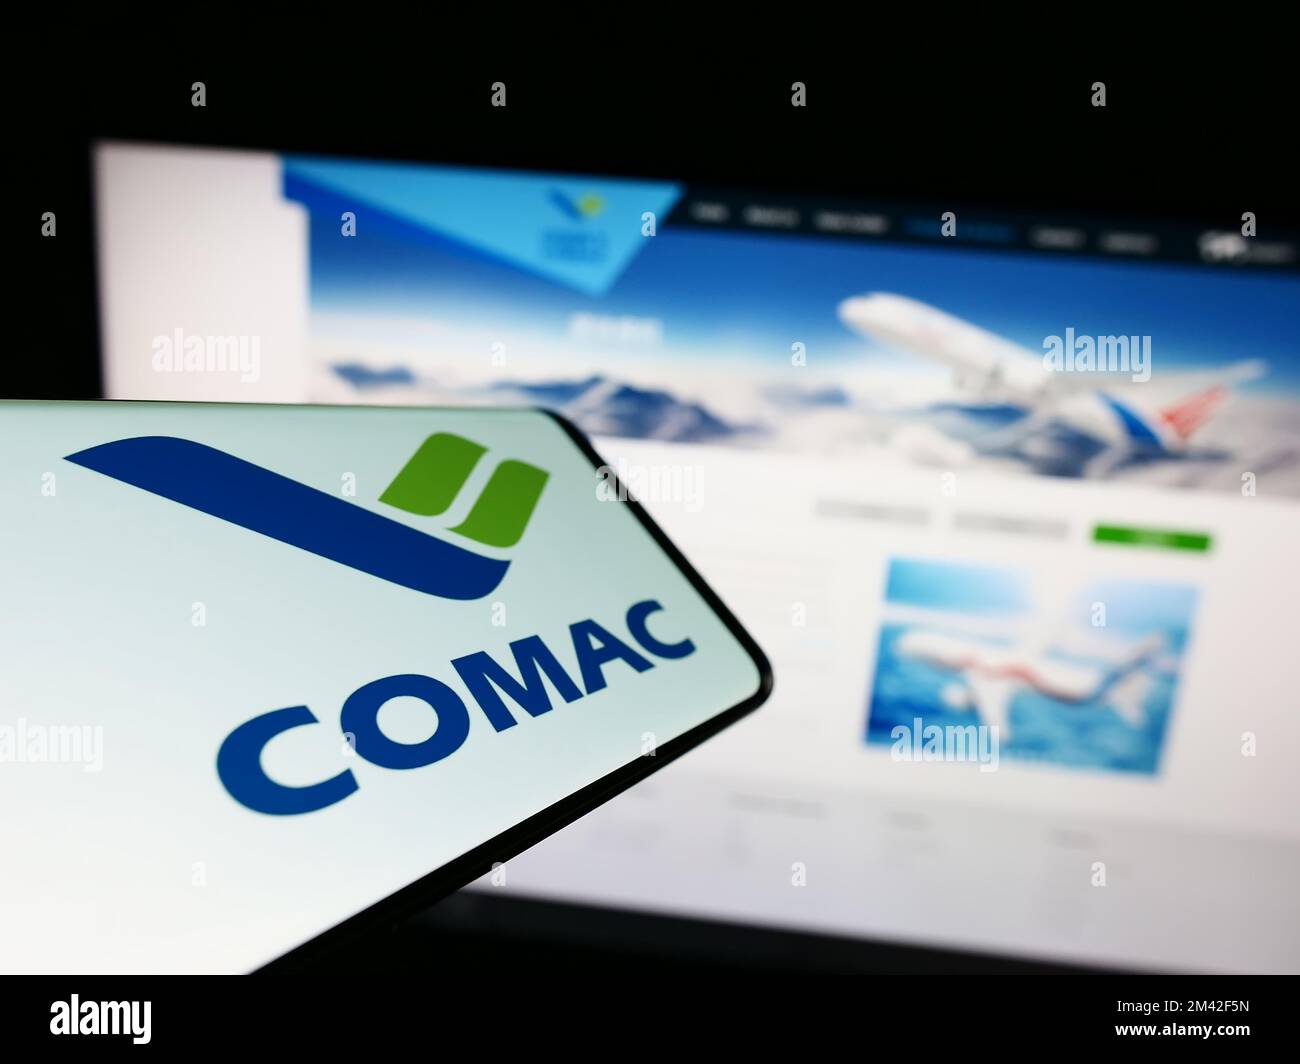 Mobile phone with logo of Commercial Aircraft Corporation of China (COMAC) on screen in front of website. Focus on center-right of phone display. Stock Photo